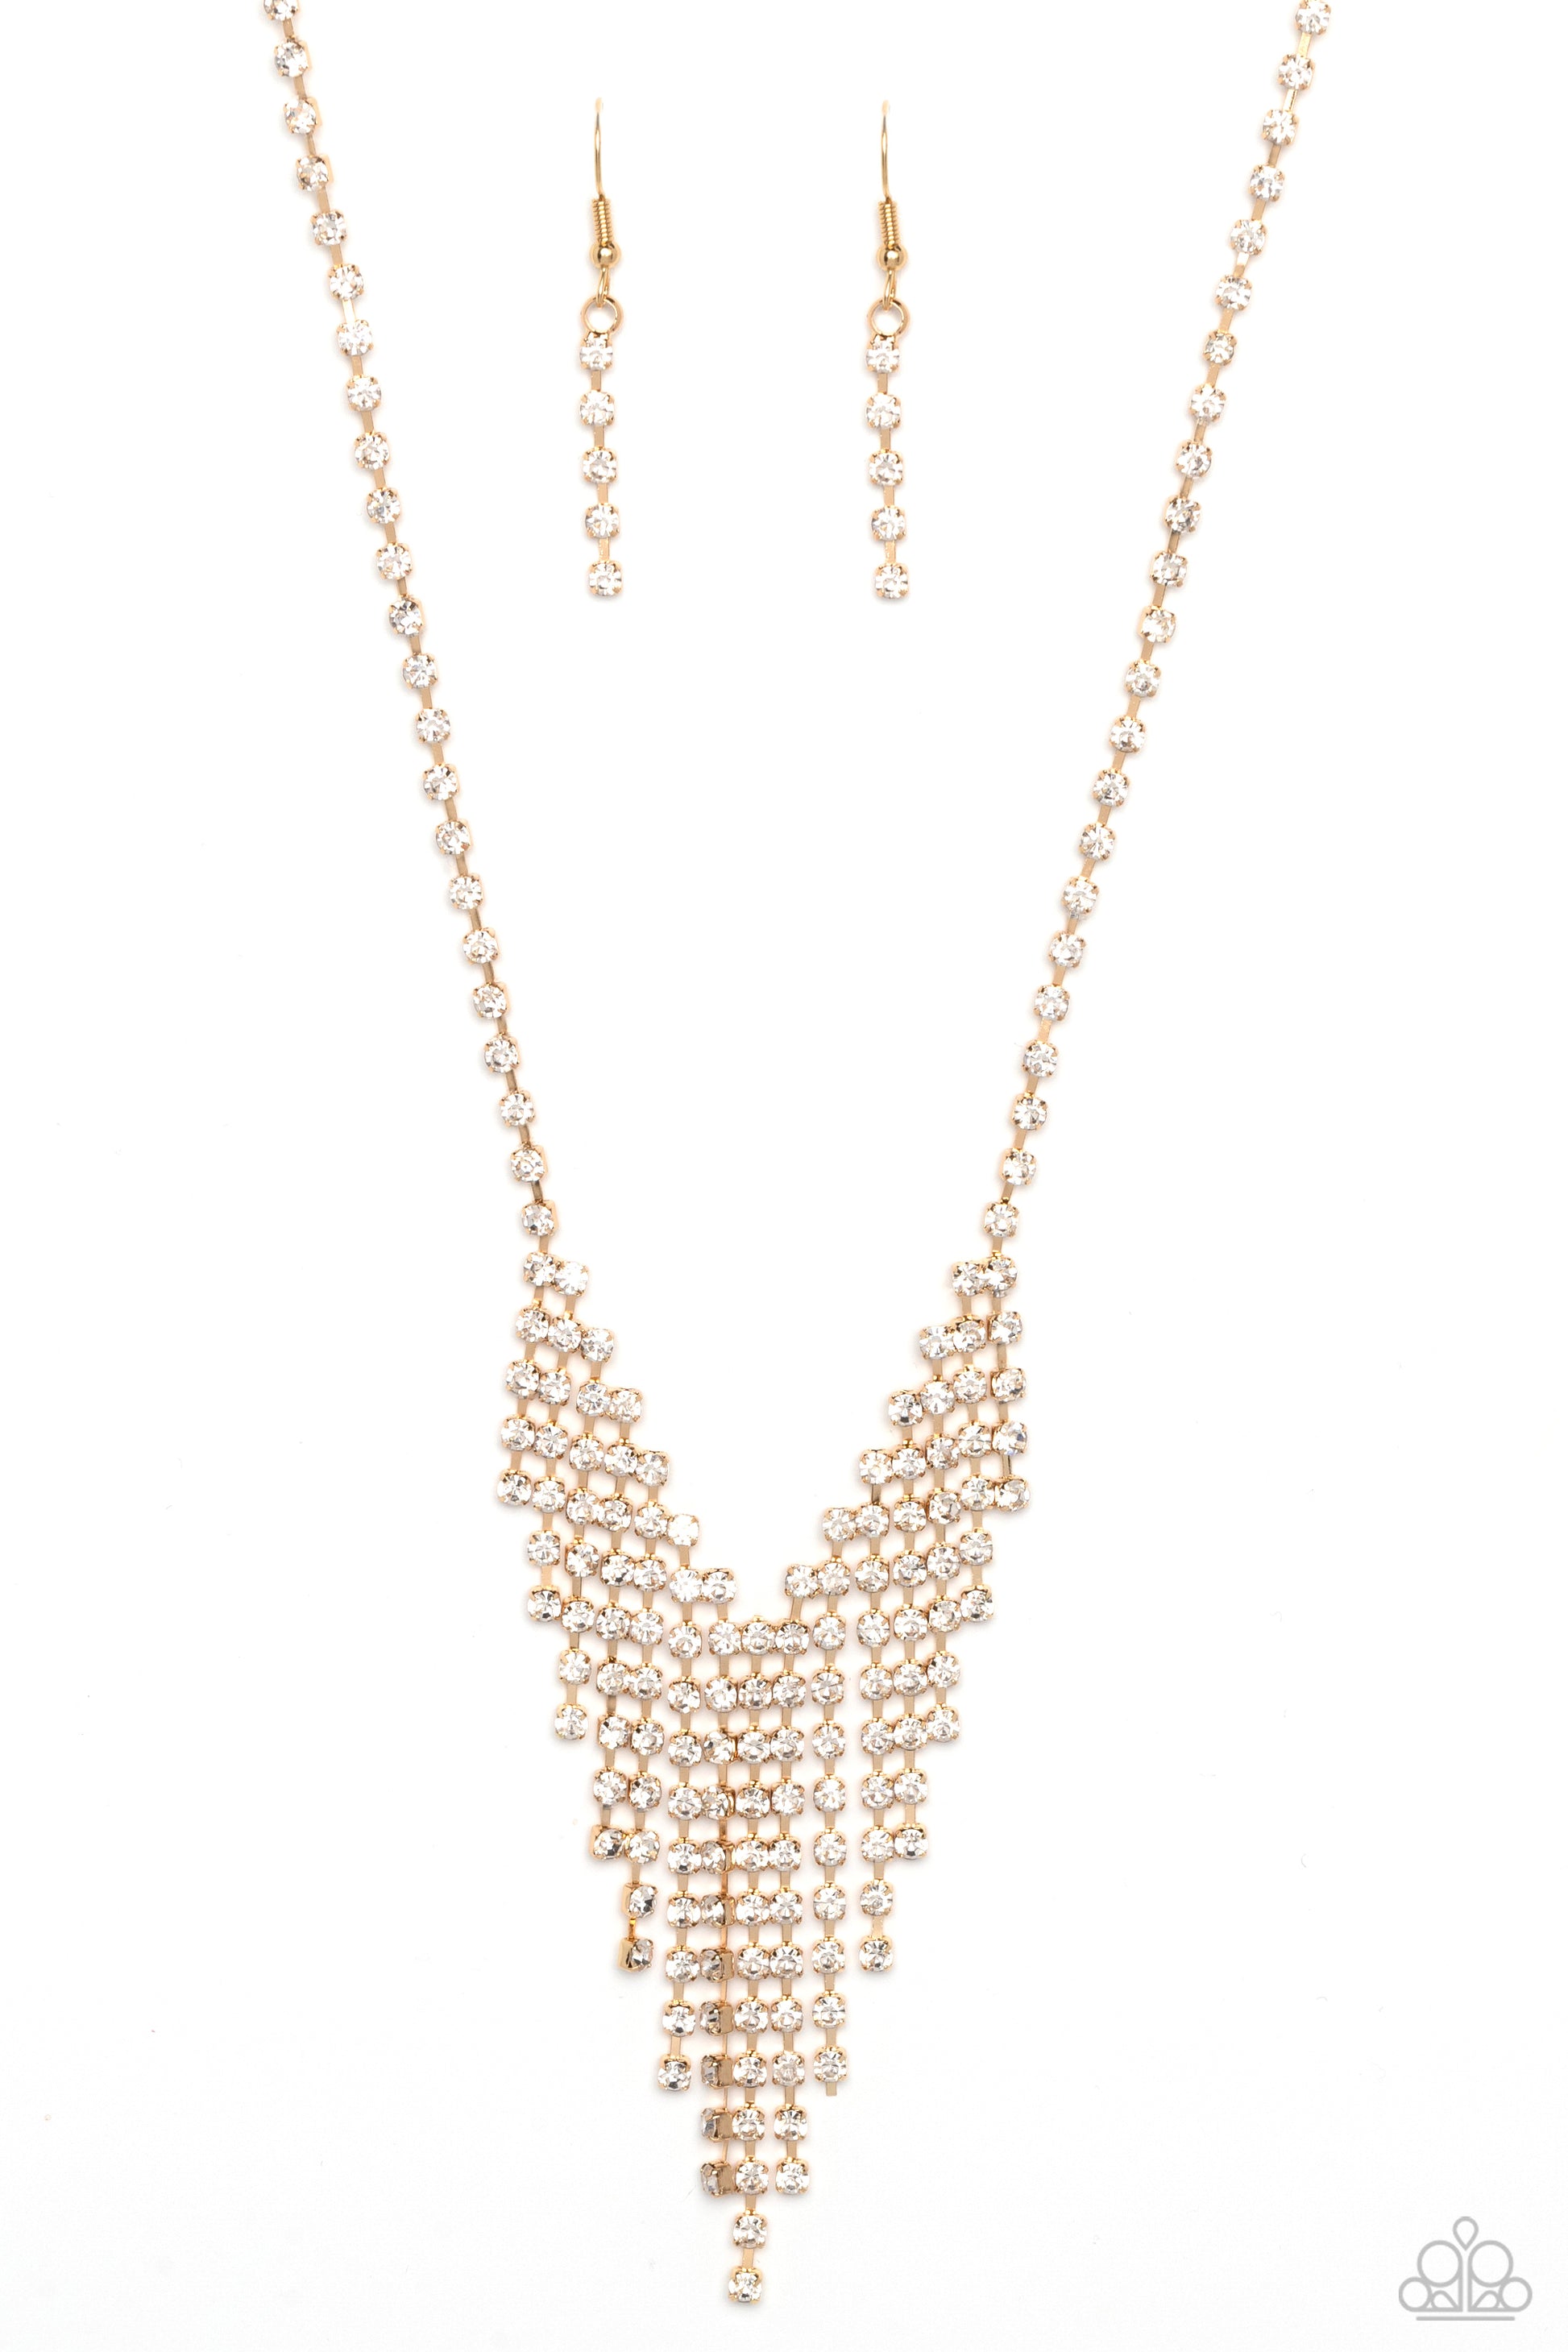 SHIMMER of Stars - Gold Paparazzi Necklace